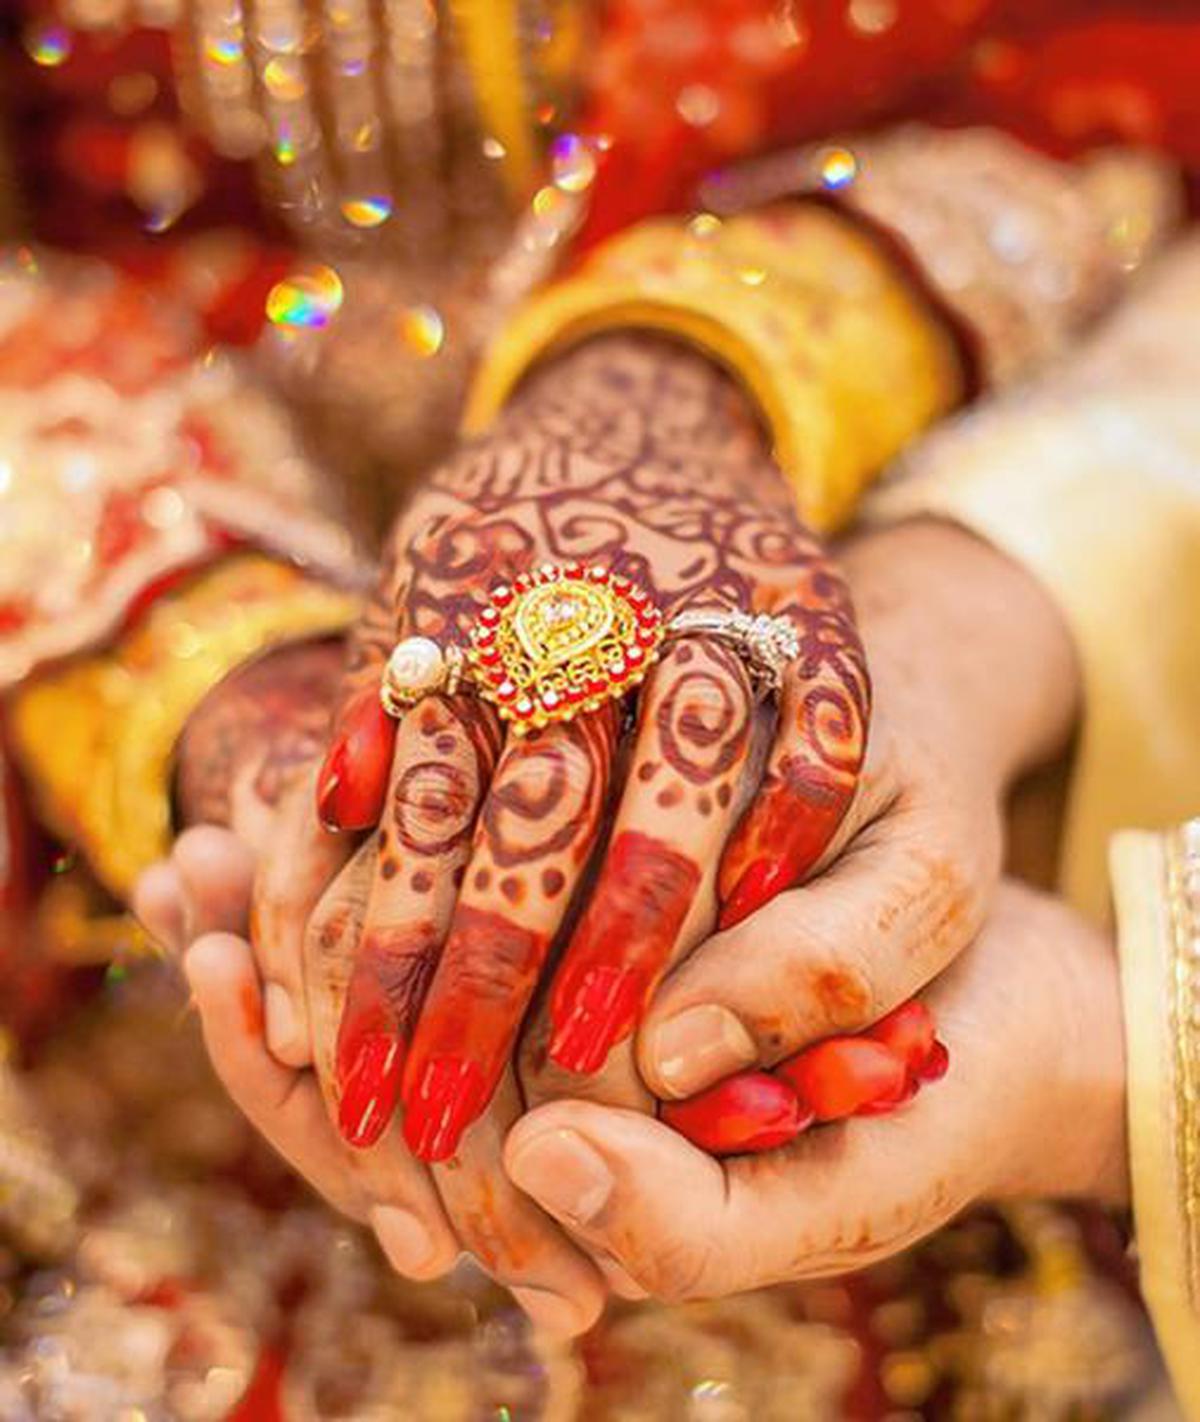 A marriage registration, 15 years after divorce in Kerala